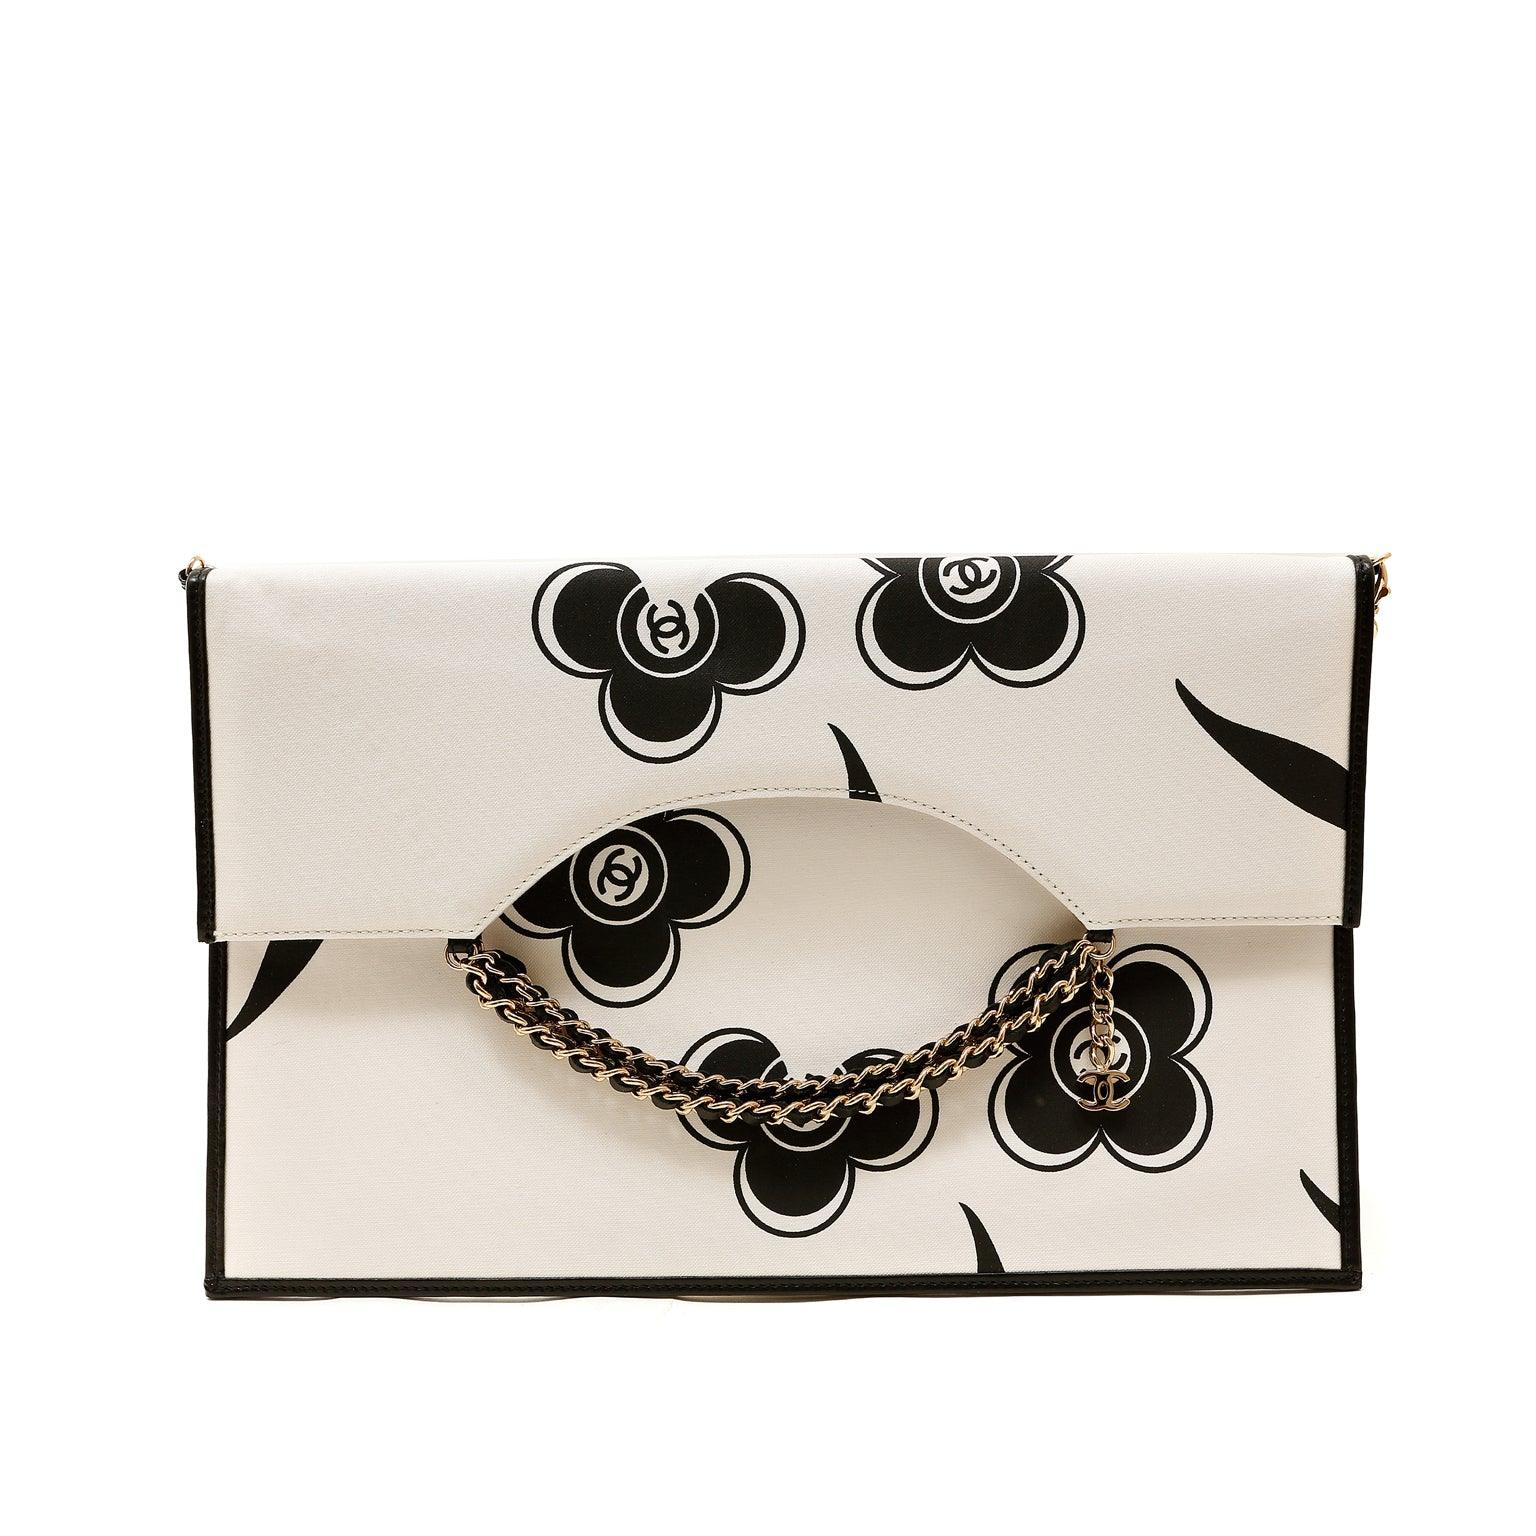 Chanel Ivory and Black Camellia Envelope Clutch with Strap – Only